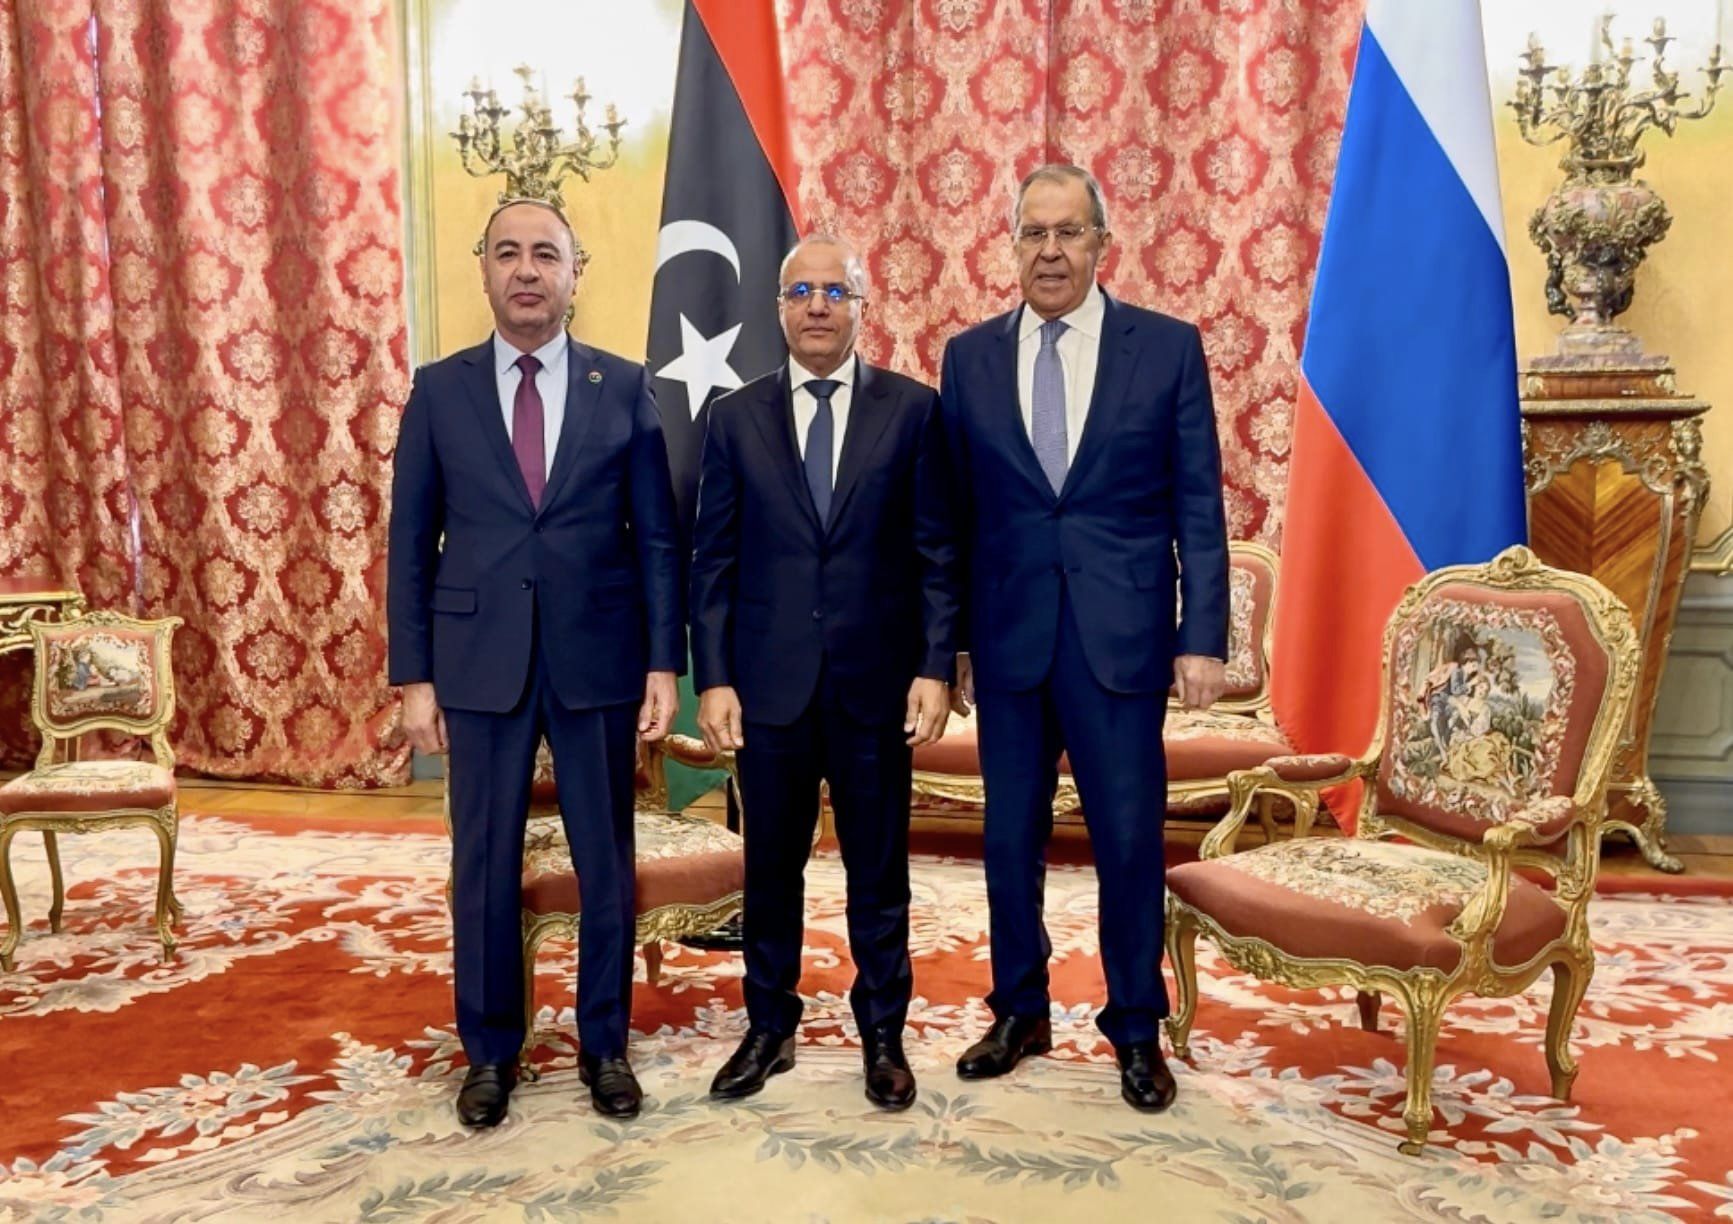 Al-Lafi stresses the importance of a positive and constructive Russian role, for the benefit of stability in Libya.